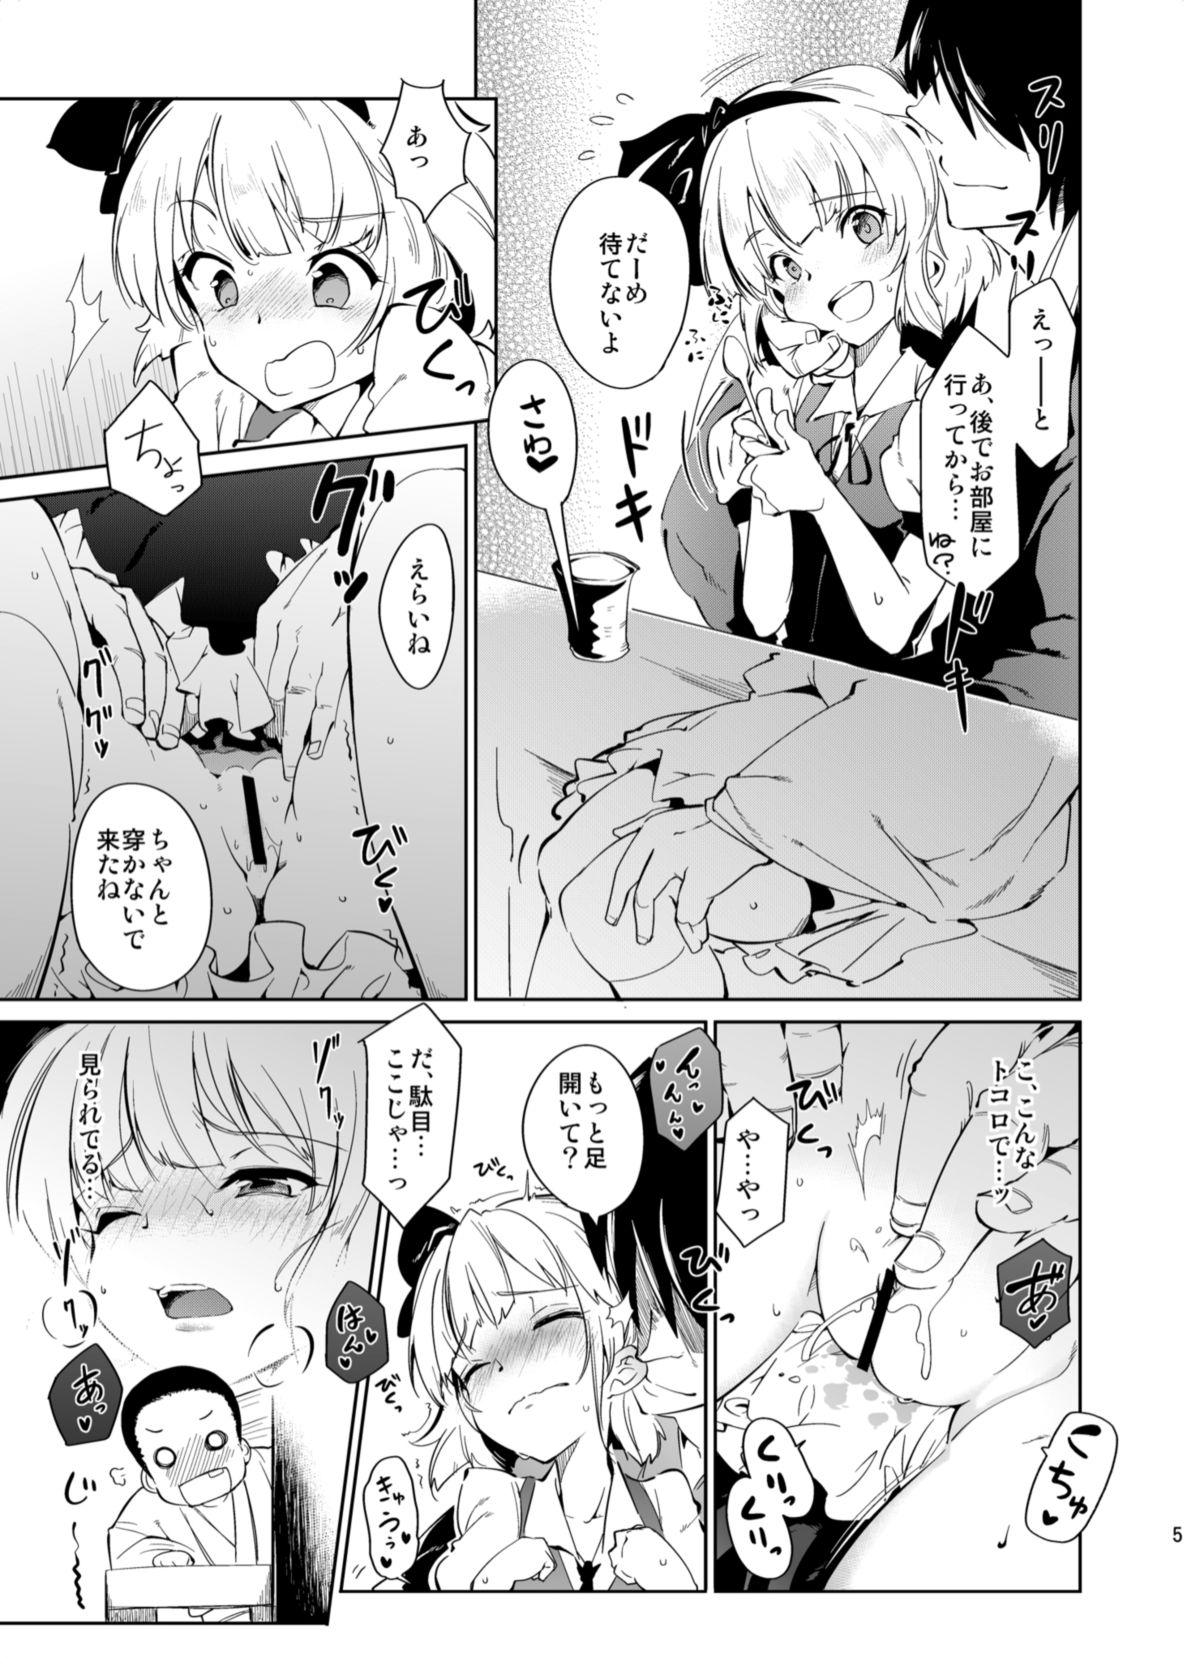 Bubble Butt Otona/2 - Touhou project Trimmed - Page 5